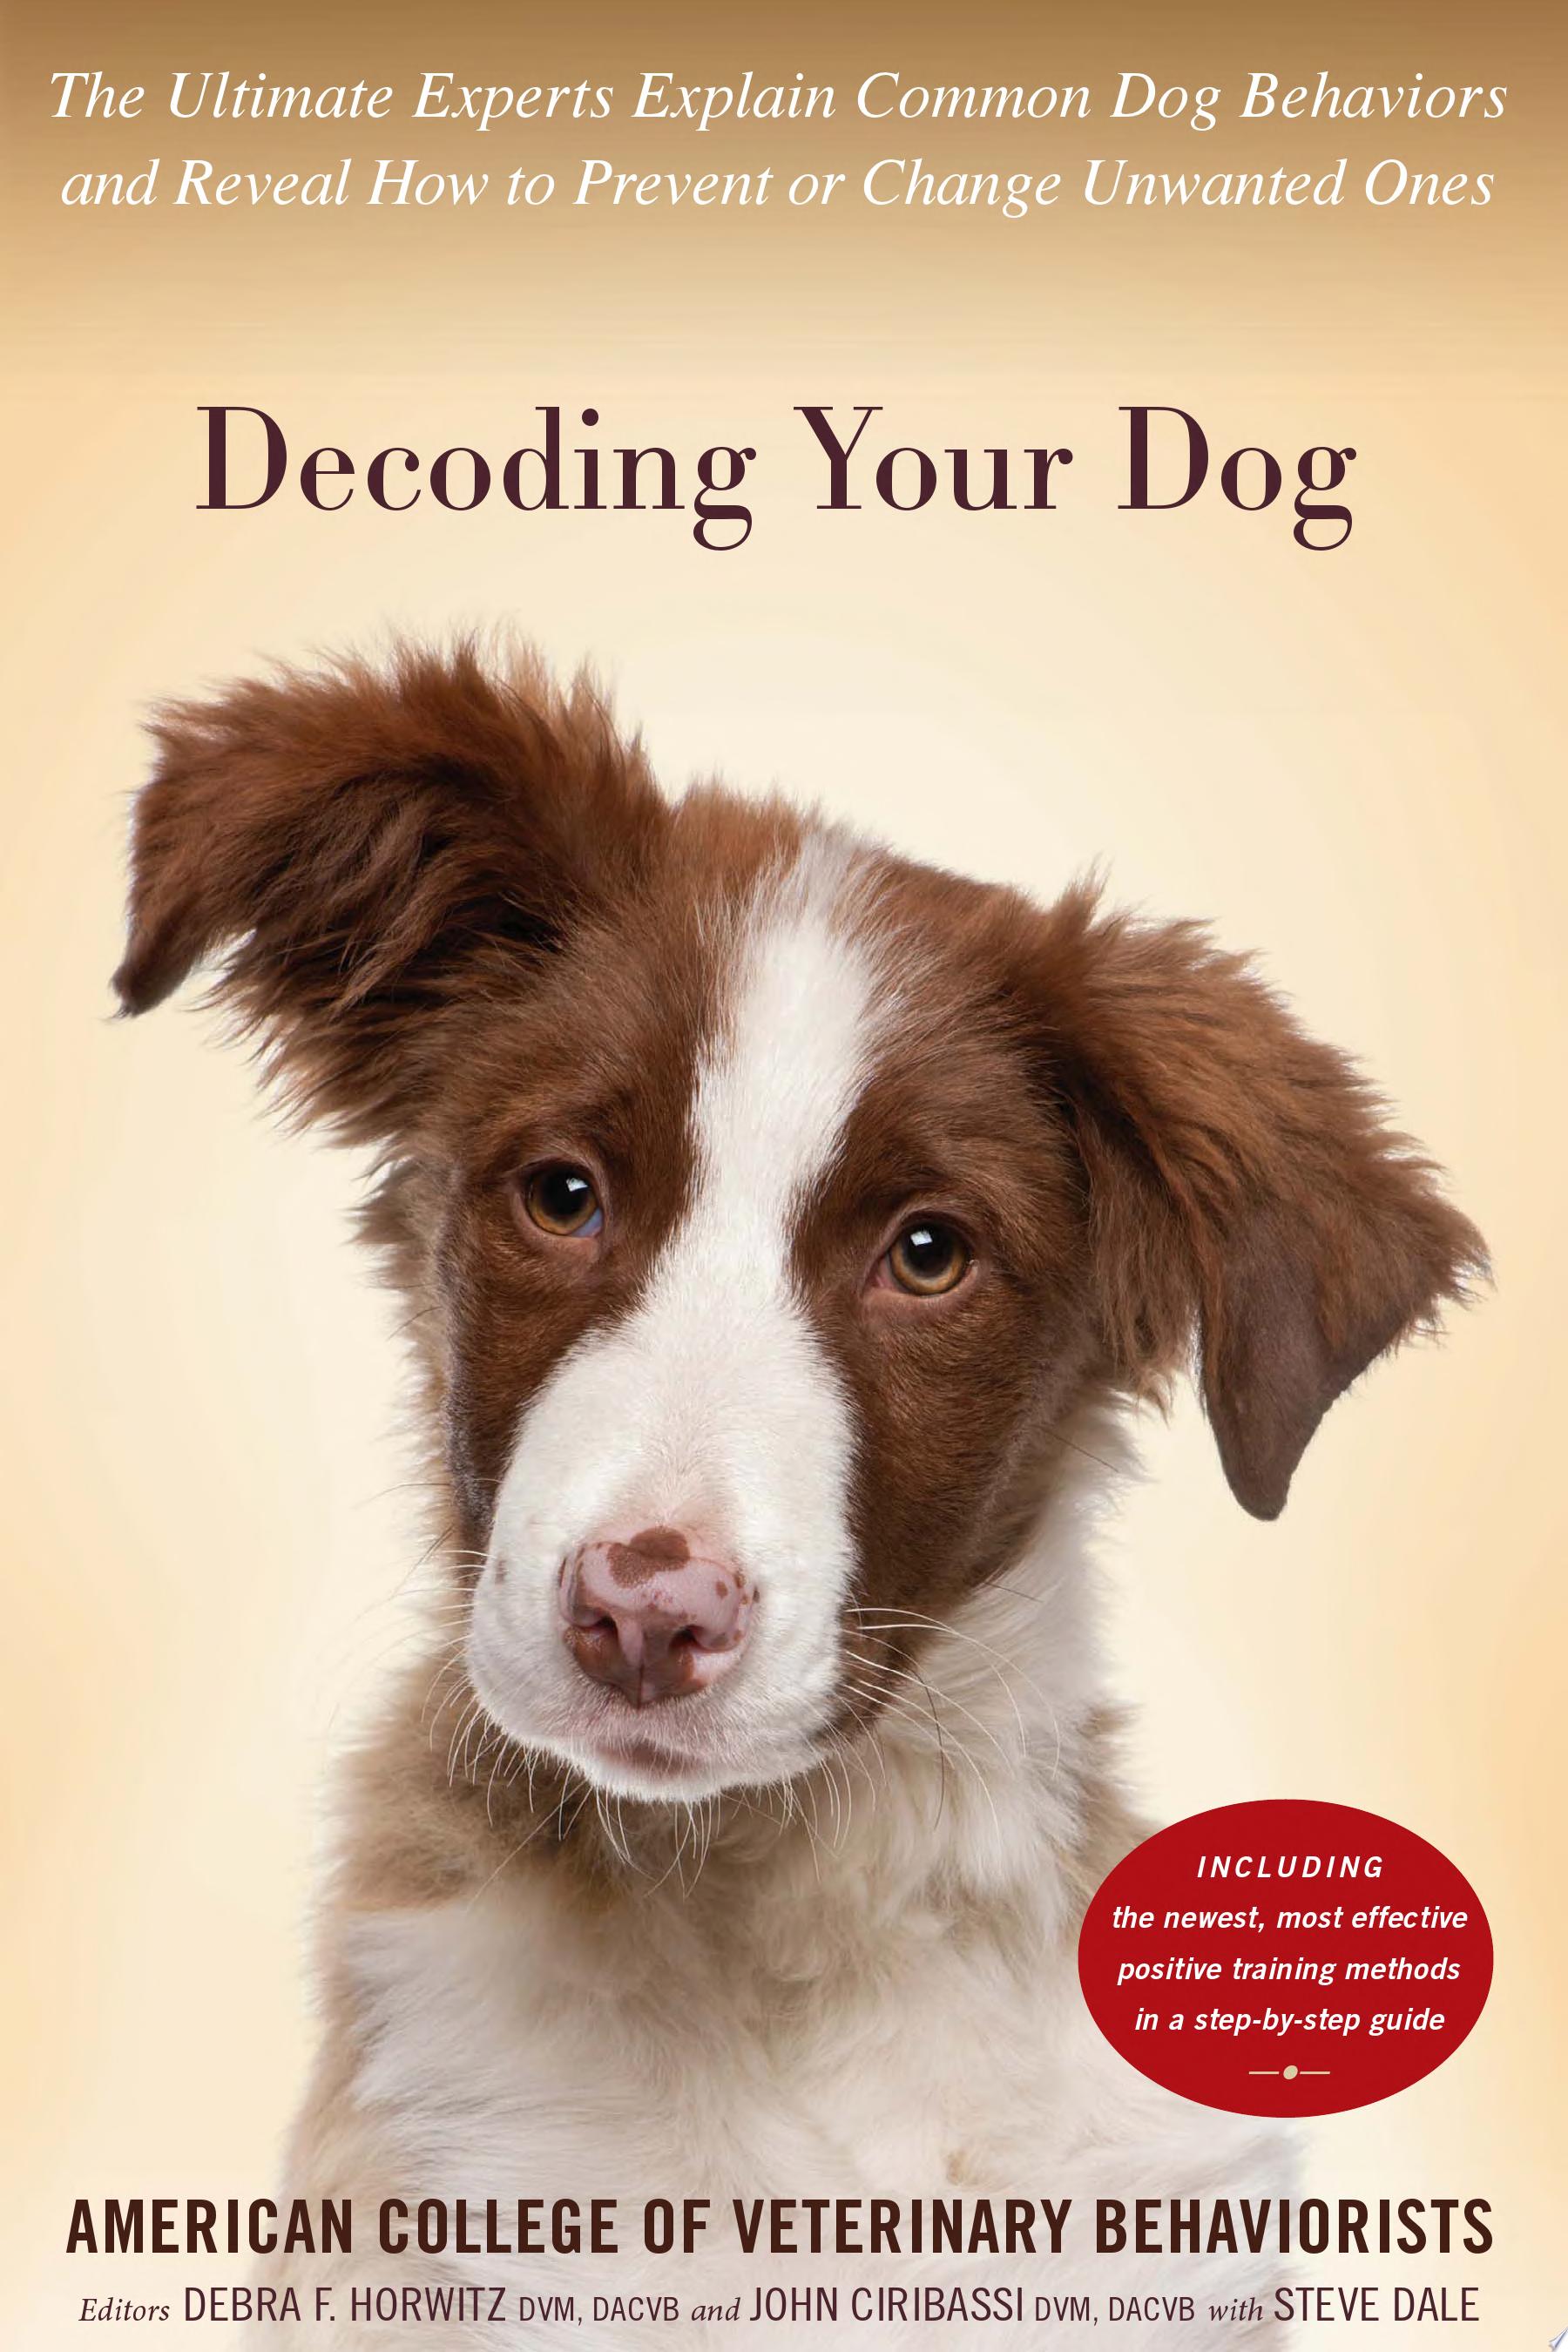 Image for "Decoding Your Dog"